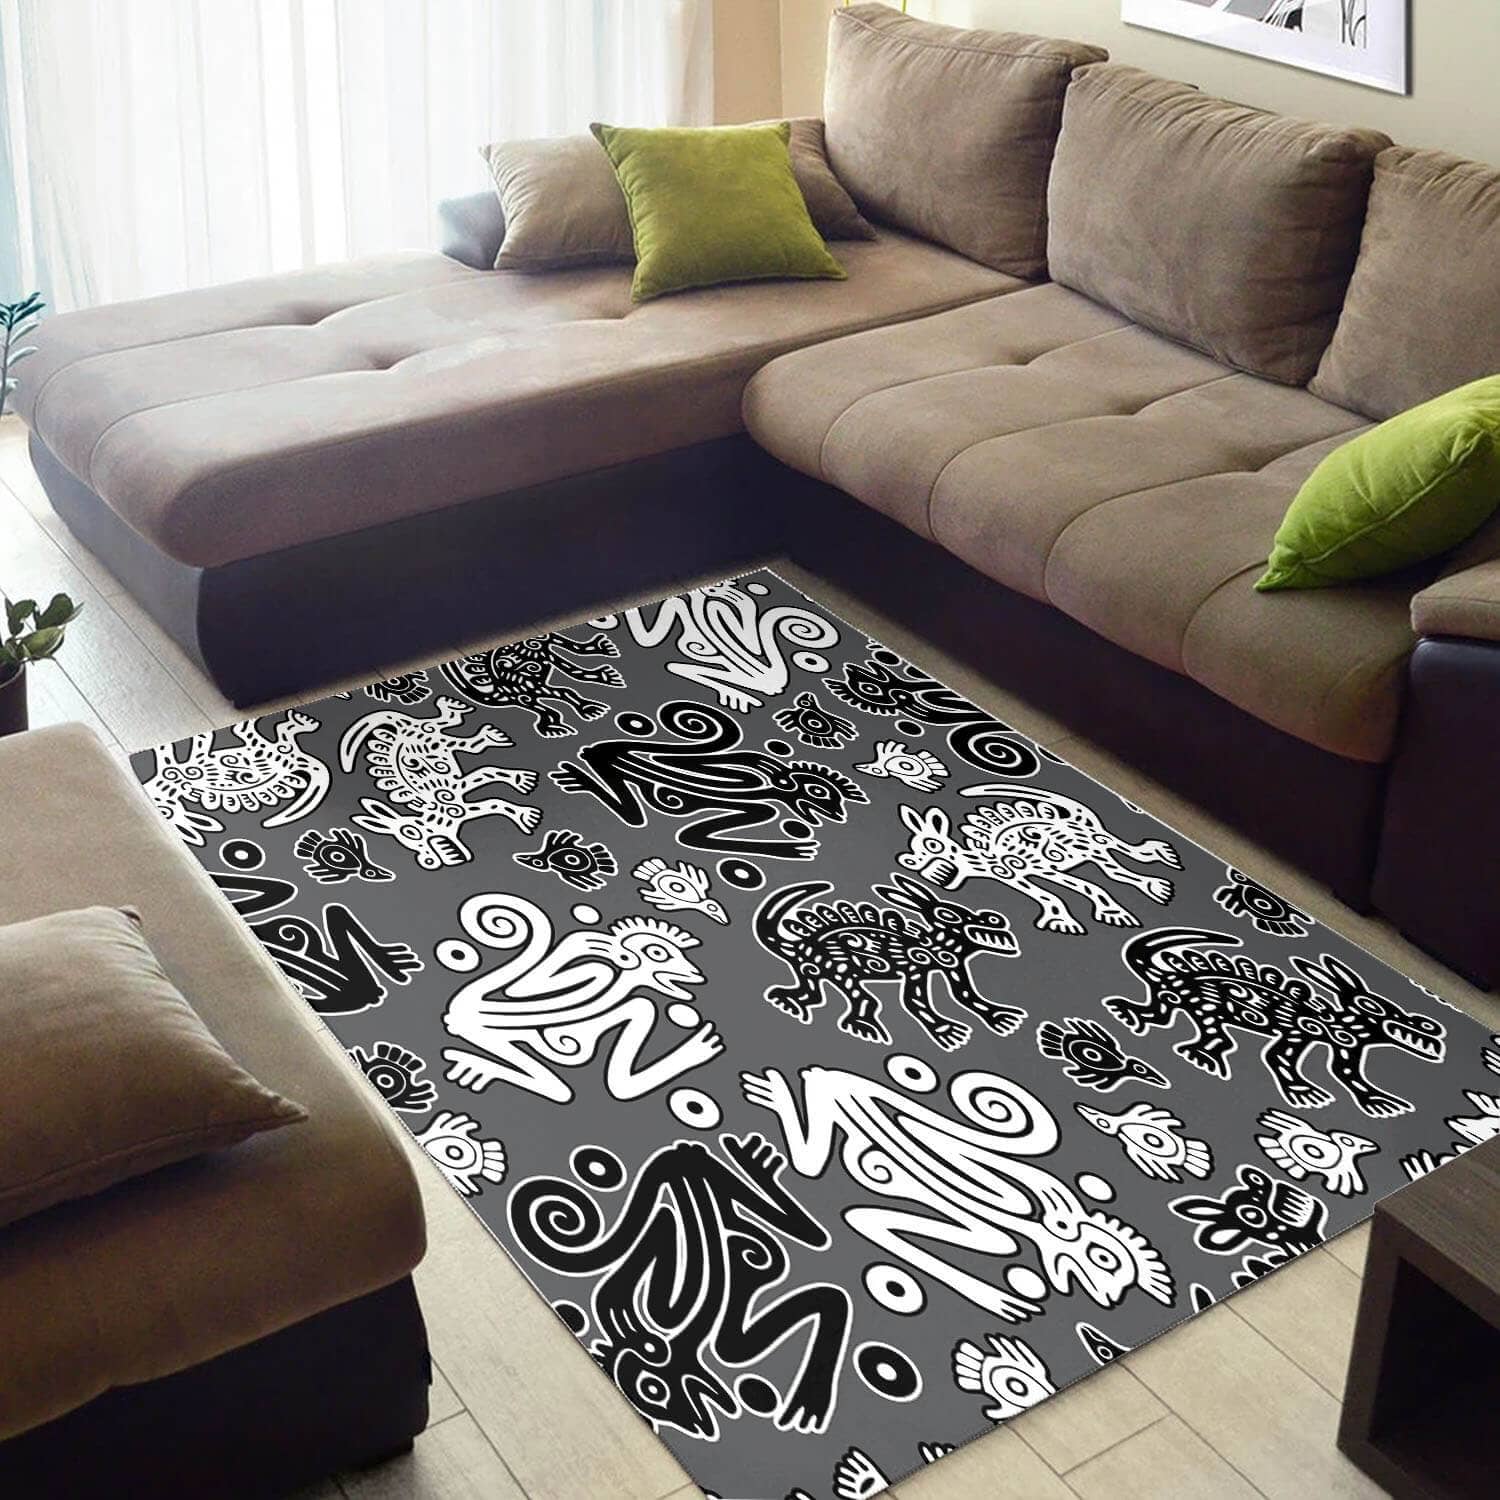 Nice African Amazing Themed Ethnic Seamless Pattern Design Floor House Rug